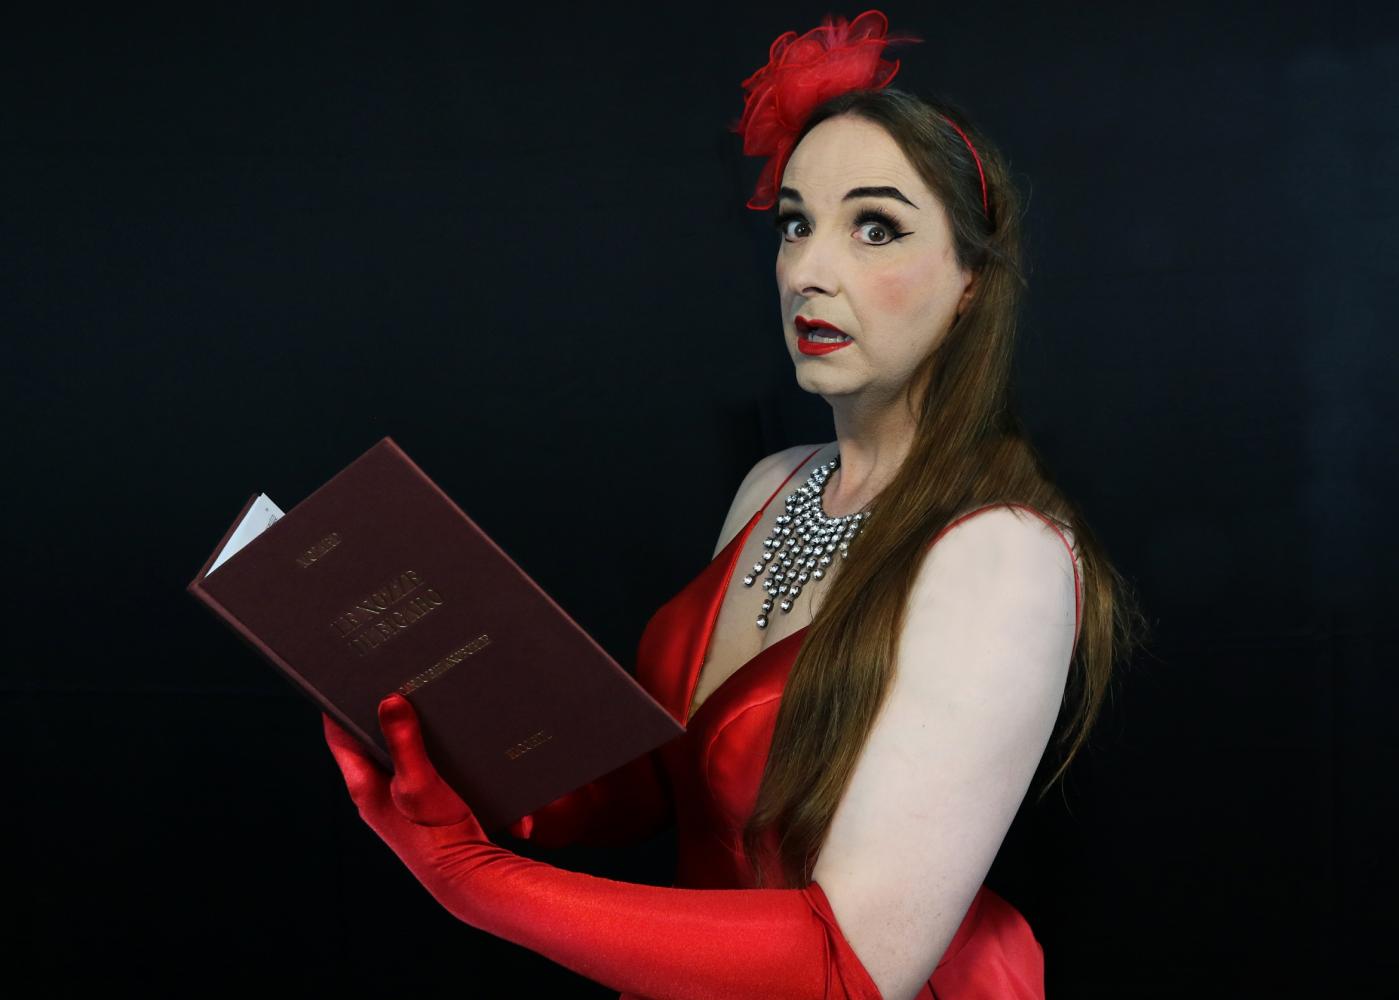 A woman with long brown hair, in a red evening dress & opera gloves is holding a music score - she looks to camera worriedly.